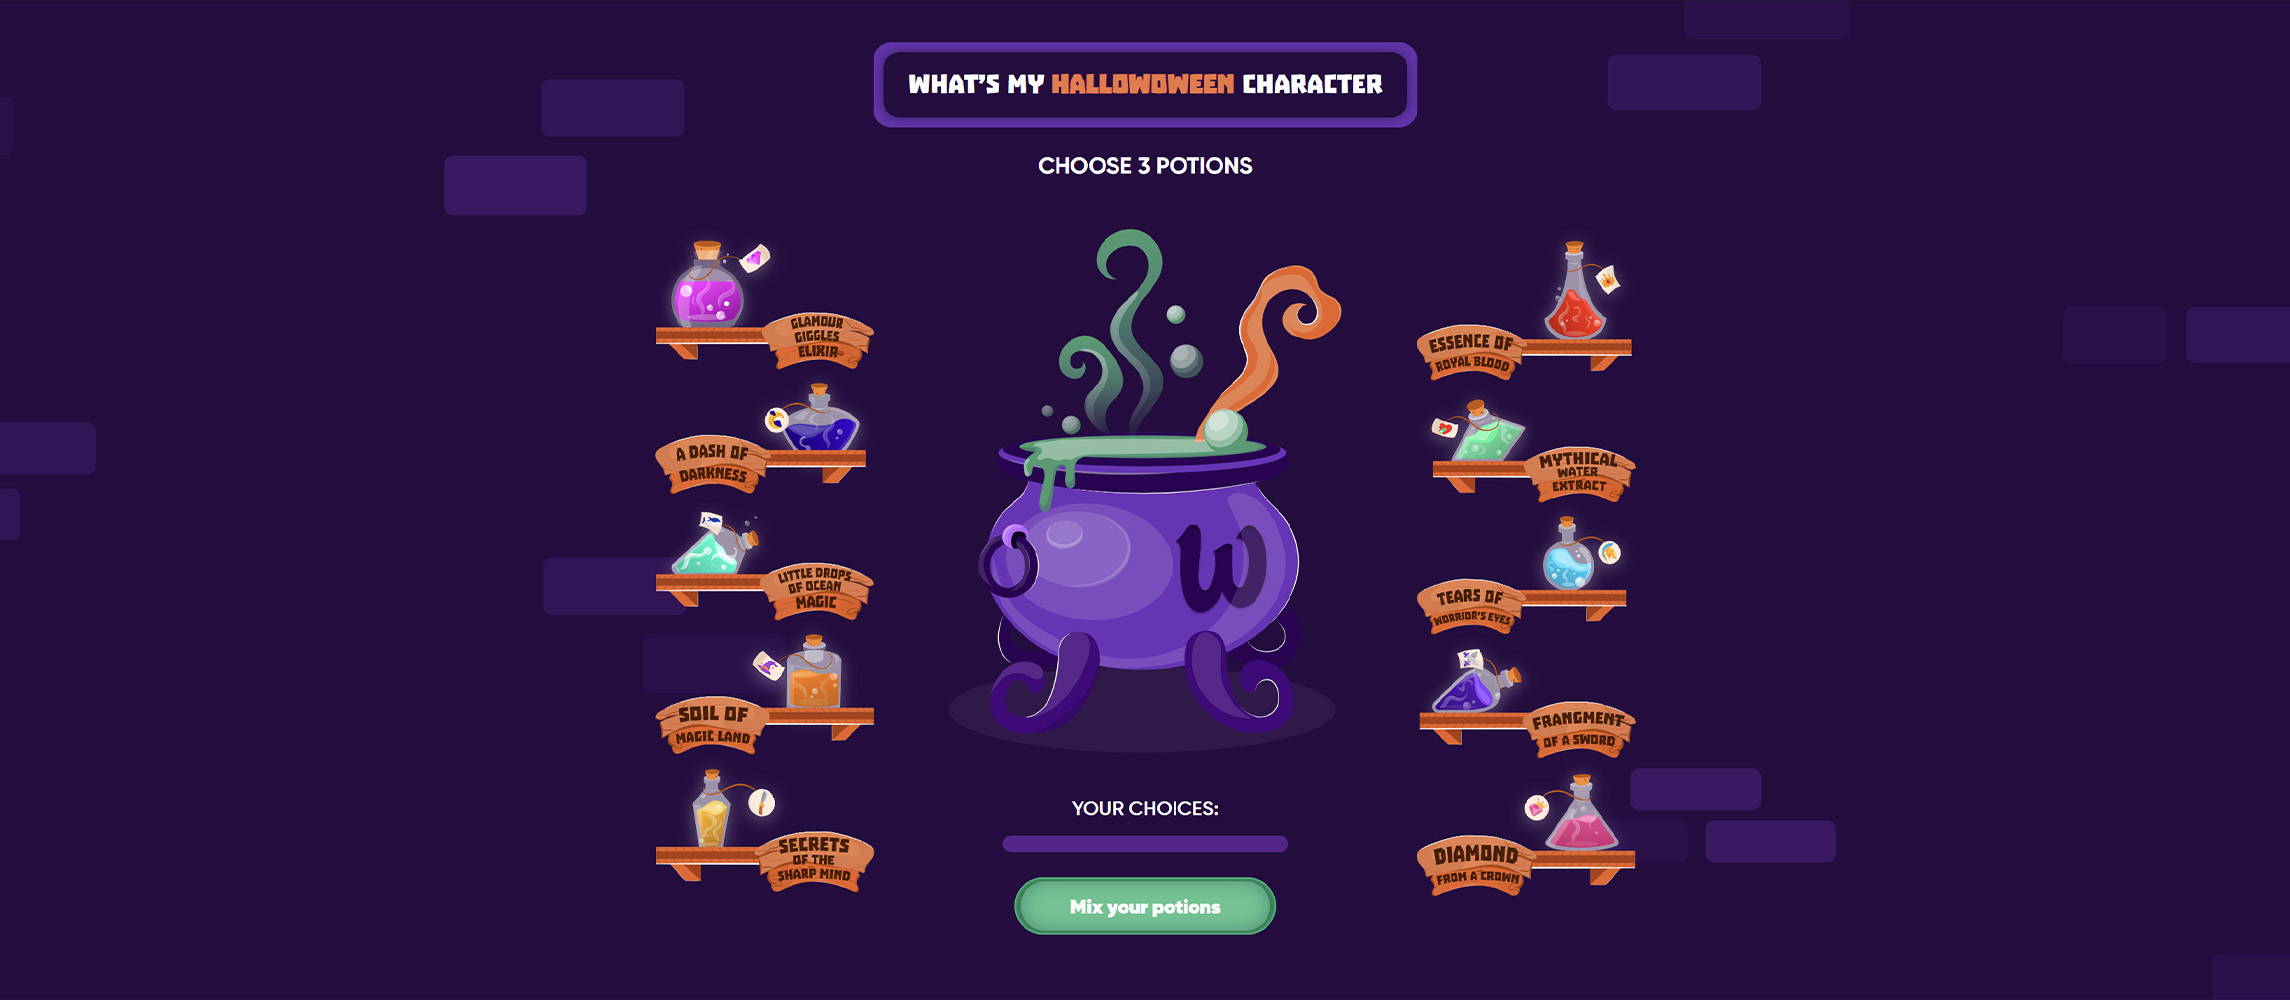 Find your Halloween character by choosing the potion bottles that best describe you.